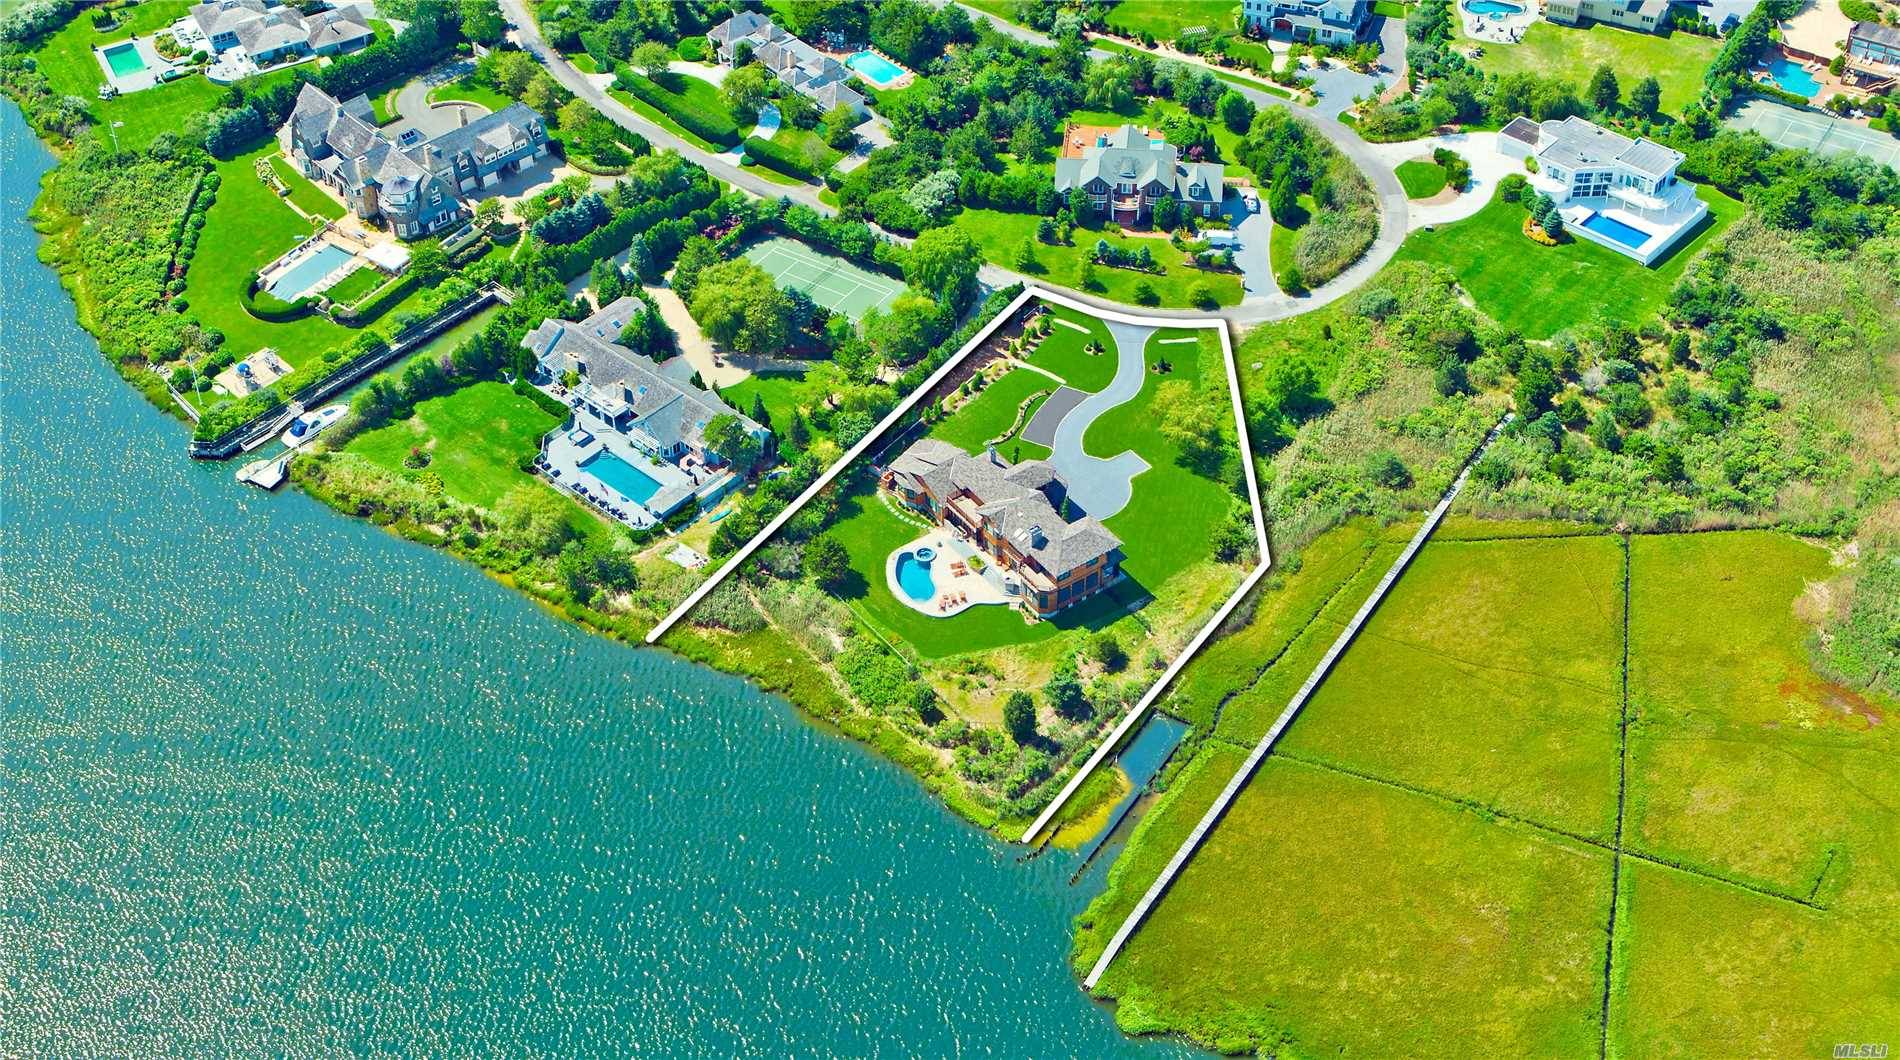 This Quality Built Home Occupies A Private, Bayfront Spot In One Of Westhampton Beach's Coveted Estate Areas Equidistant From Main Street Dune Road.